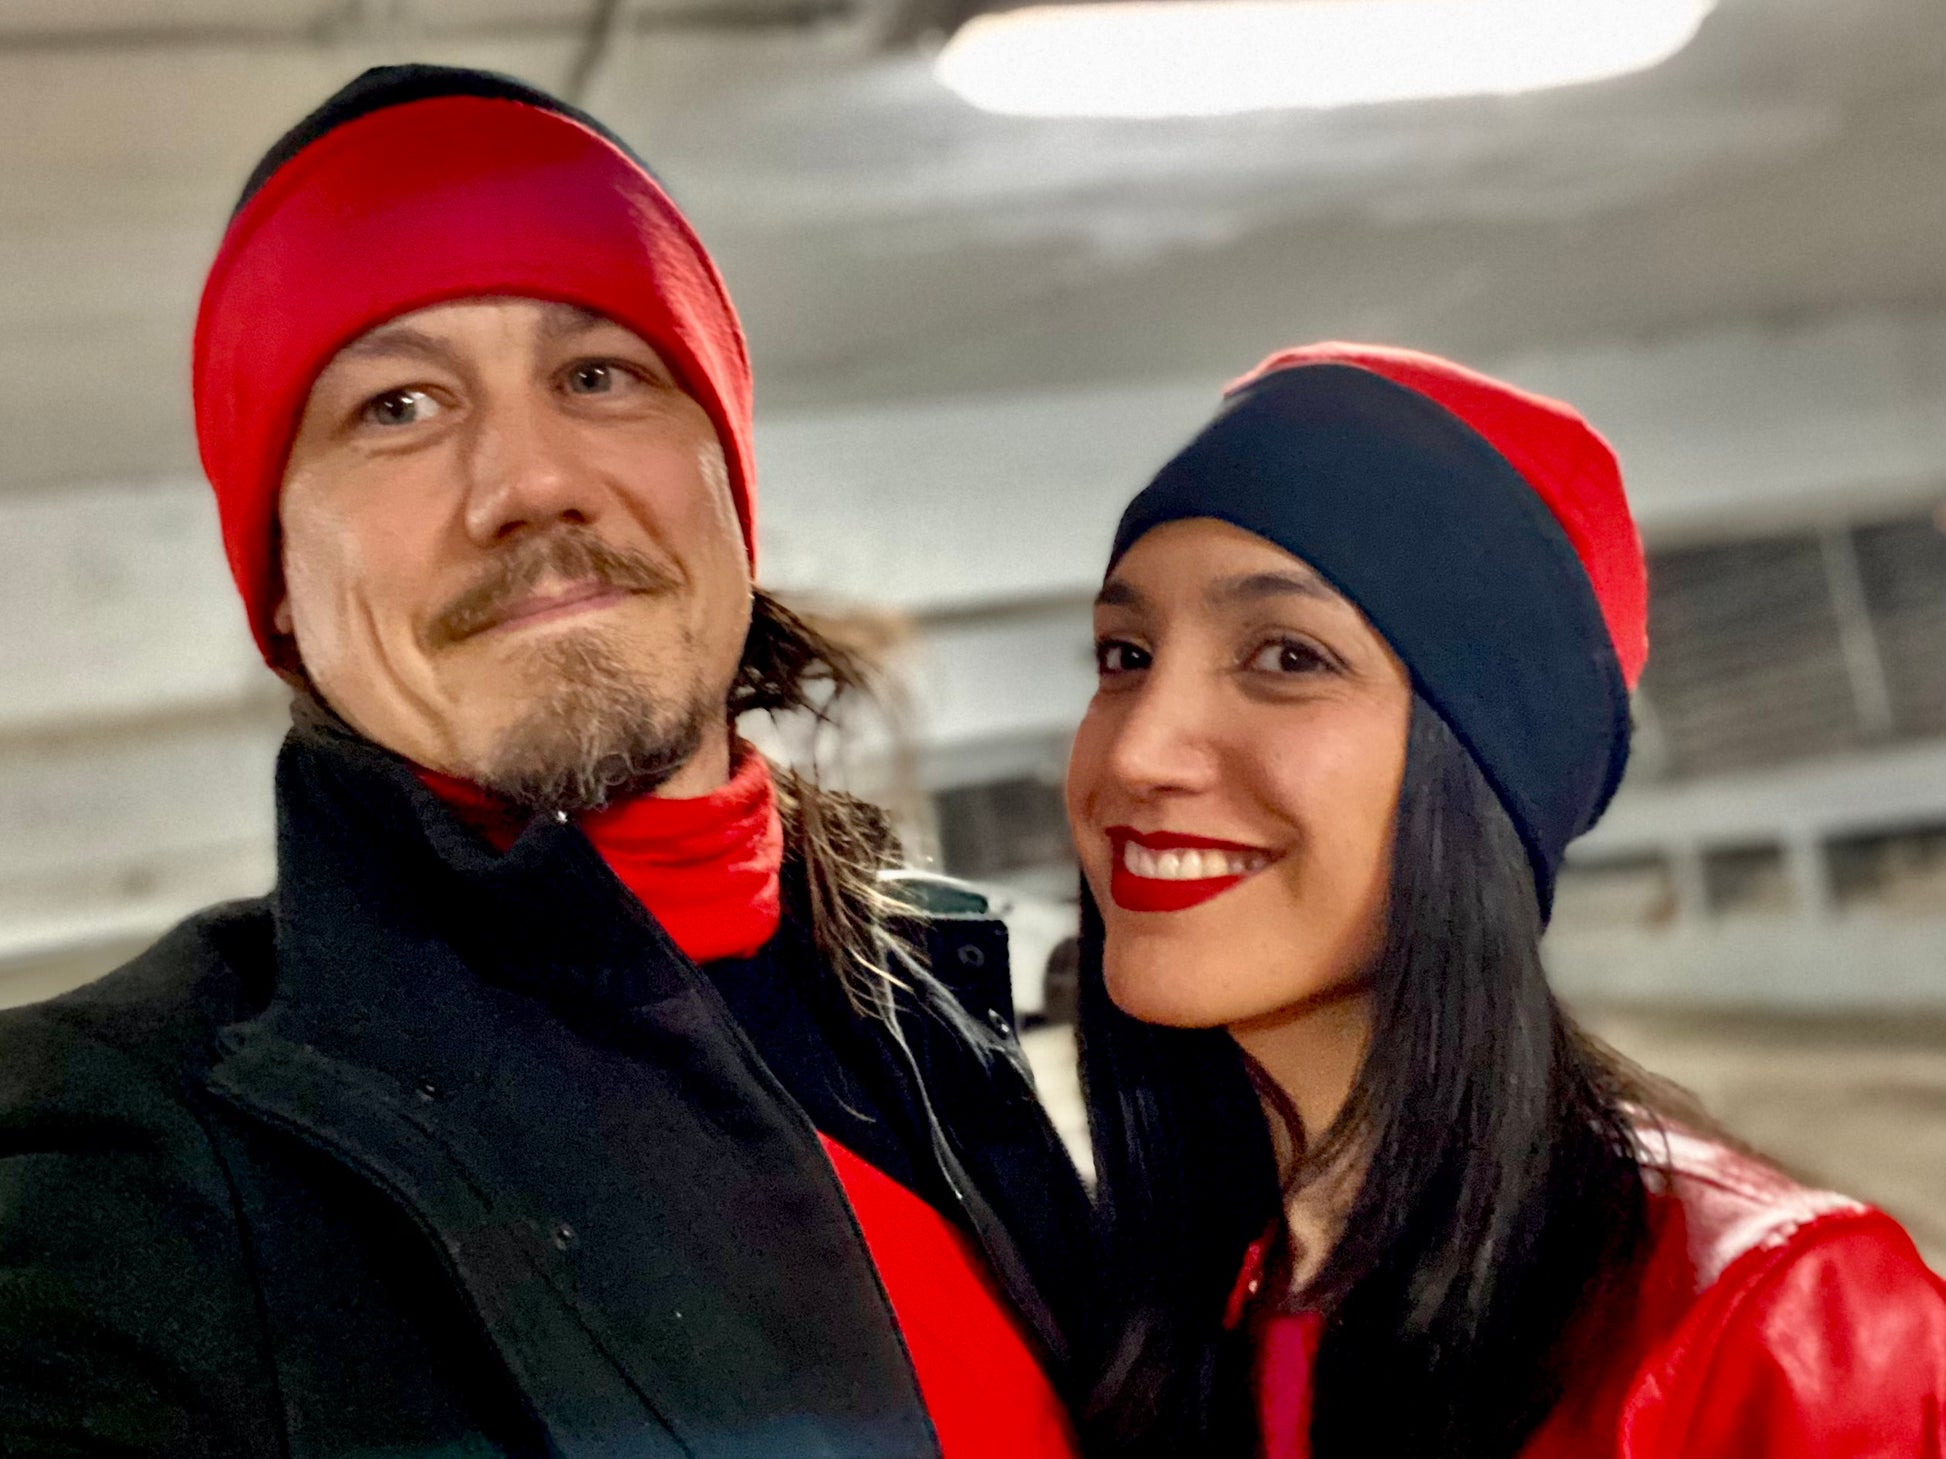 Jonathan Brunelle and Sanaz Firouzi rocks the red and black reversible hat by ELZI.ca made from wool.